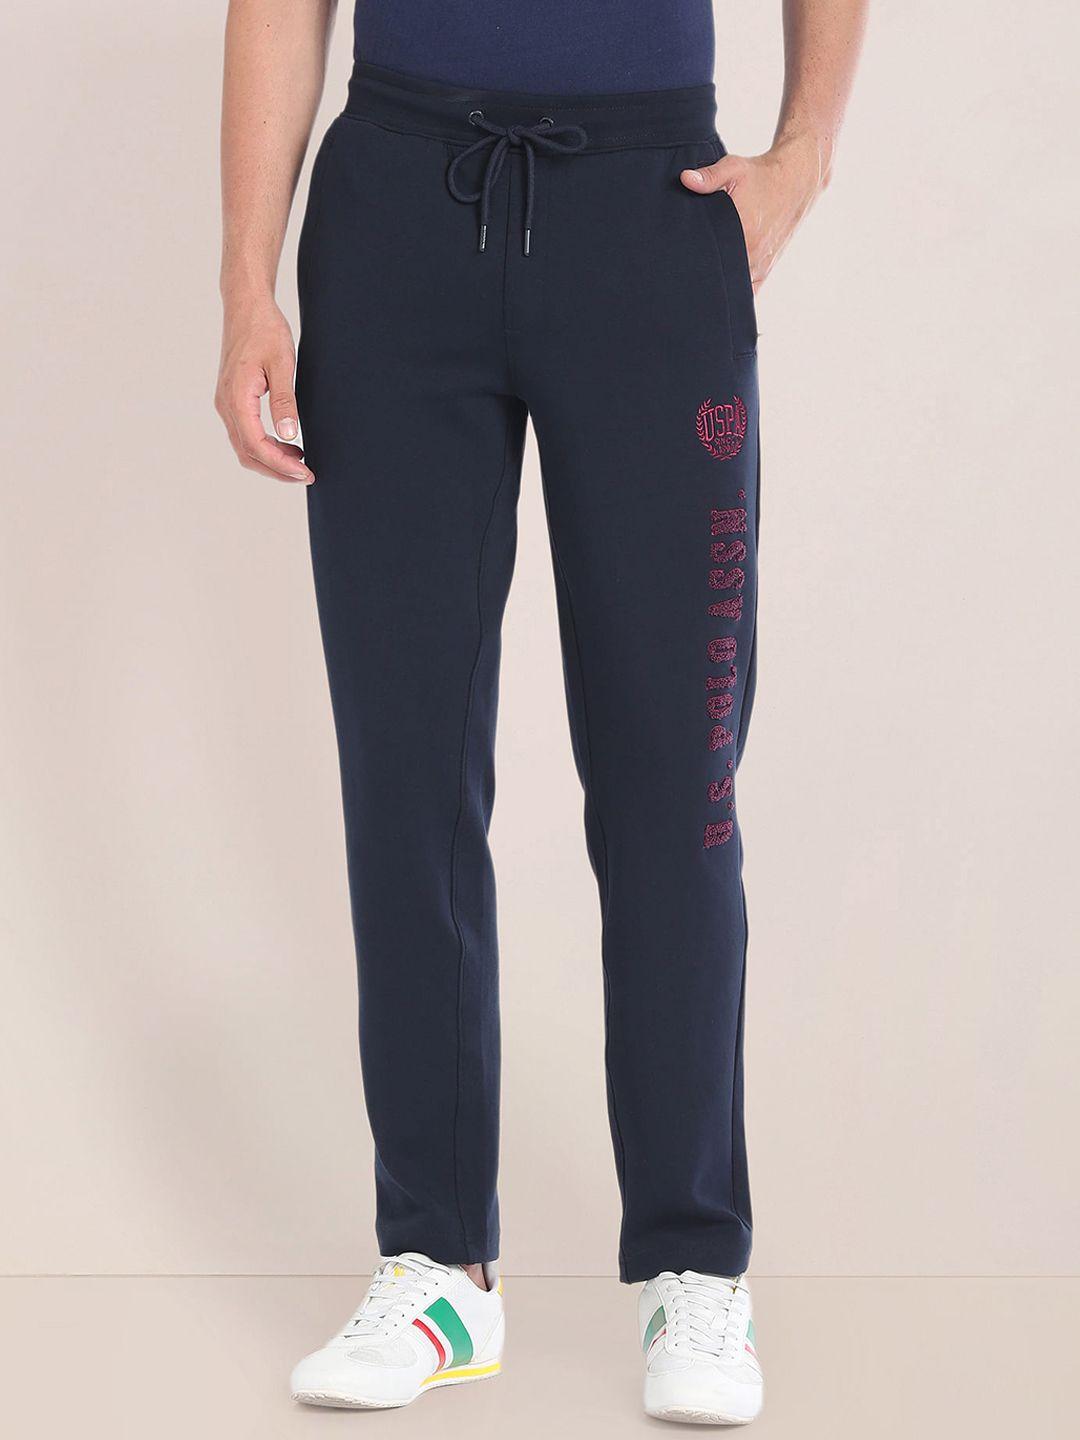 u.s.-polo-assn.-men-straight-fit-mid-rise-brand-name-printed-track-pants